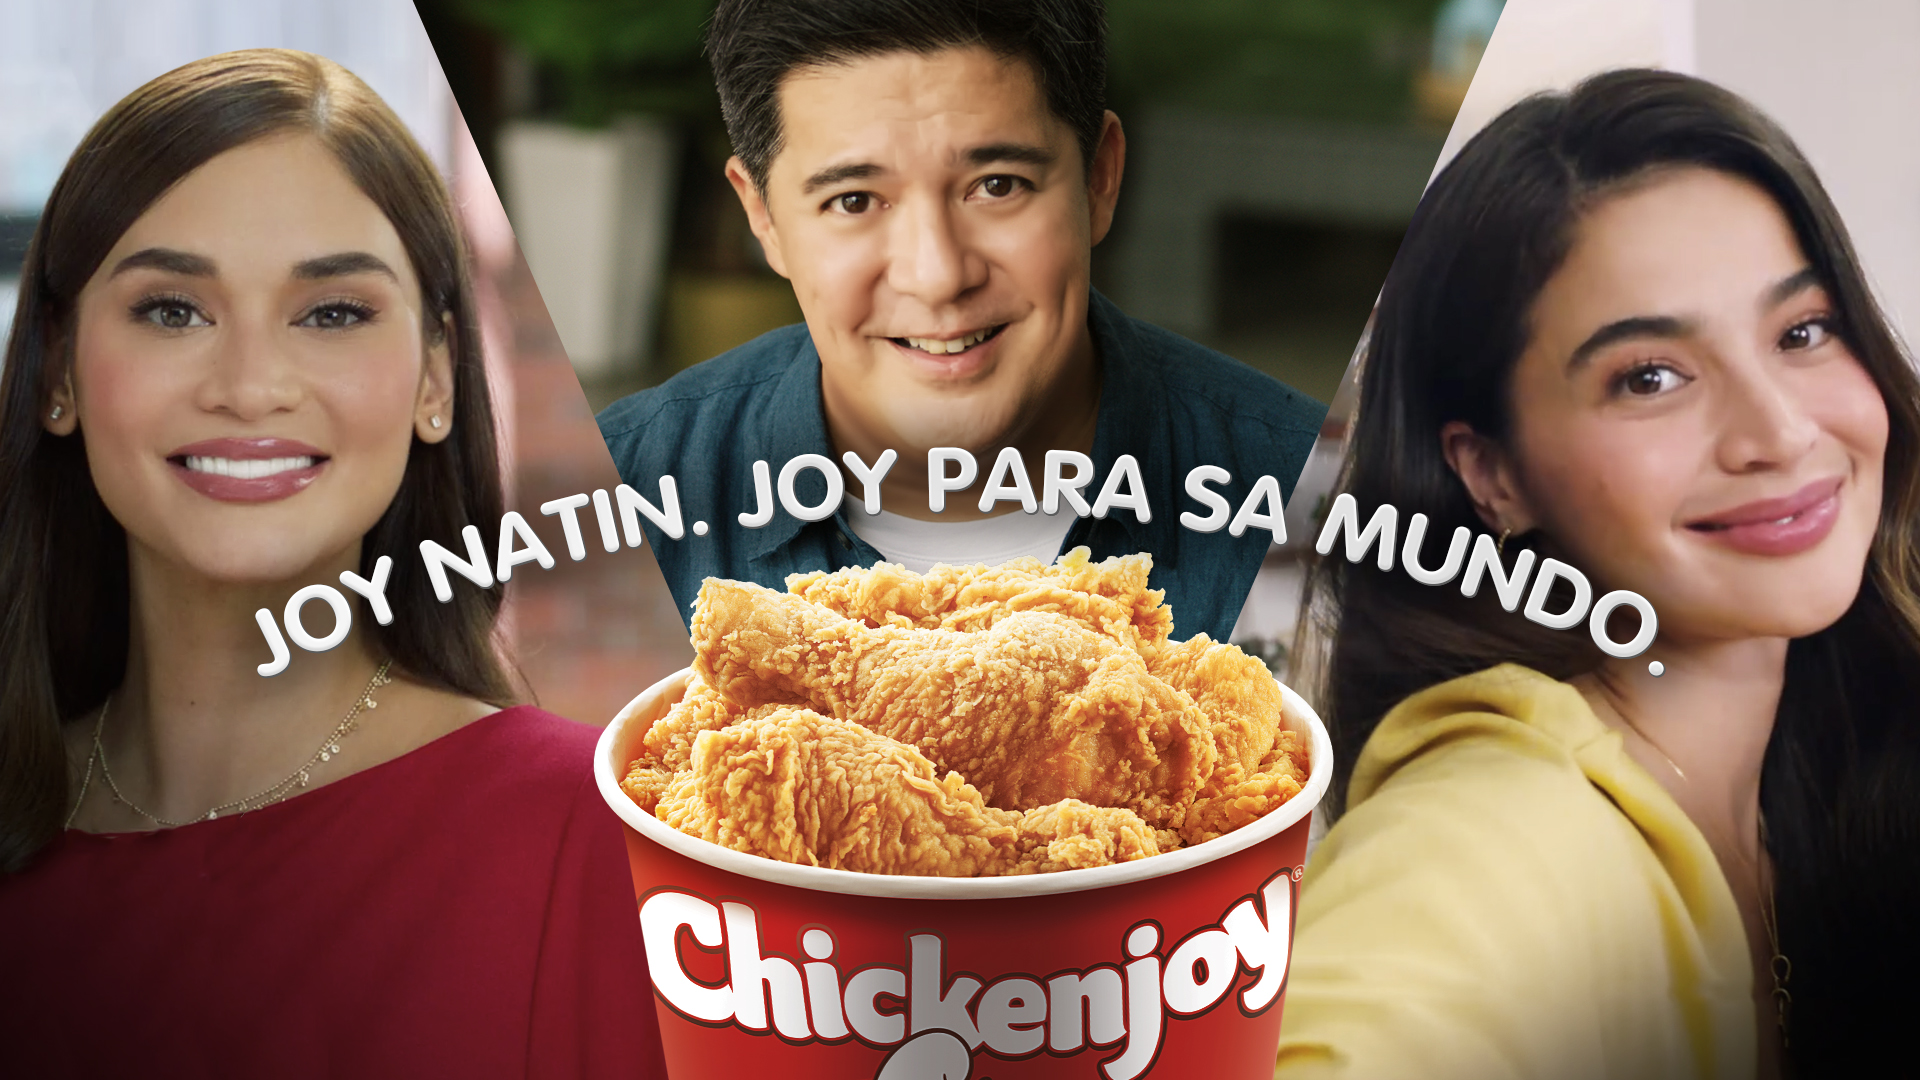 Top Filipino stars – Pia Wurtzbach, Anne Curtis, and Aga Muhlach share why Chickenjoy means so much to the world